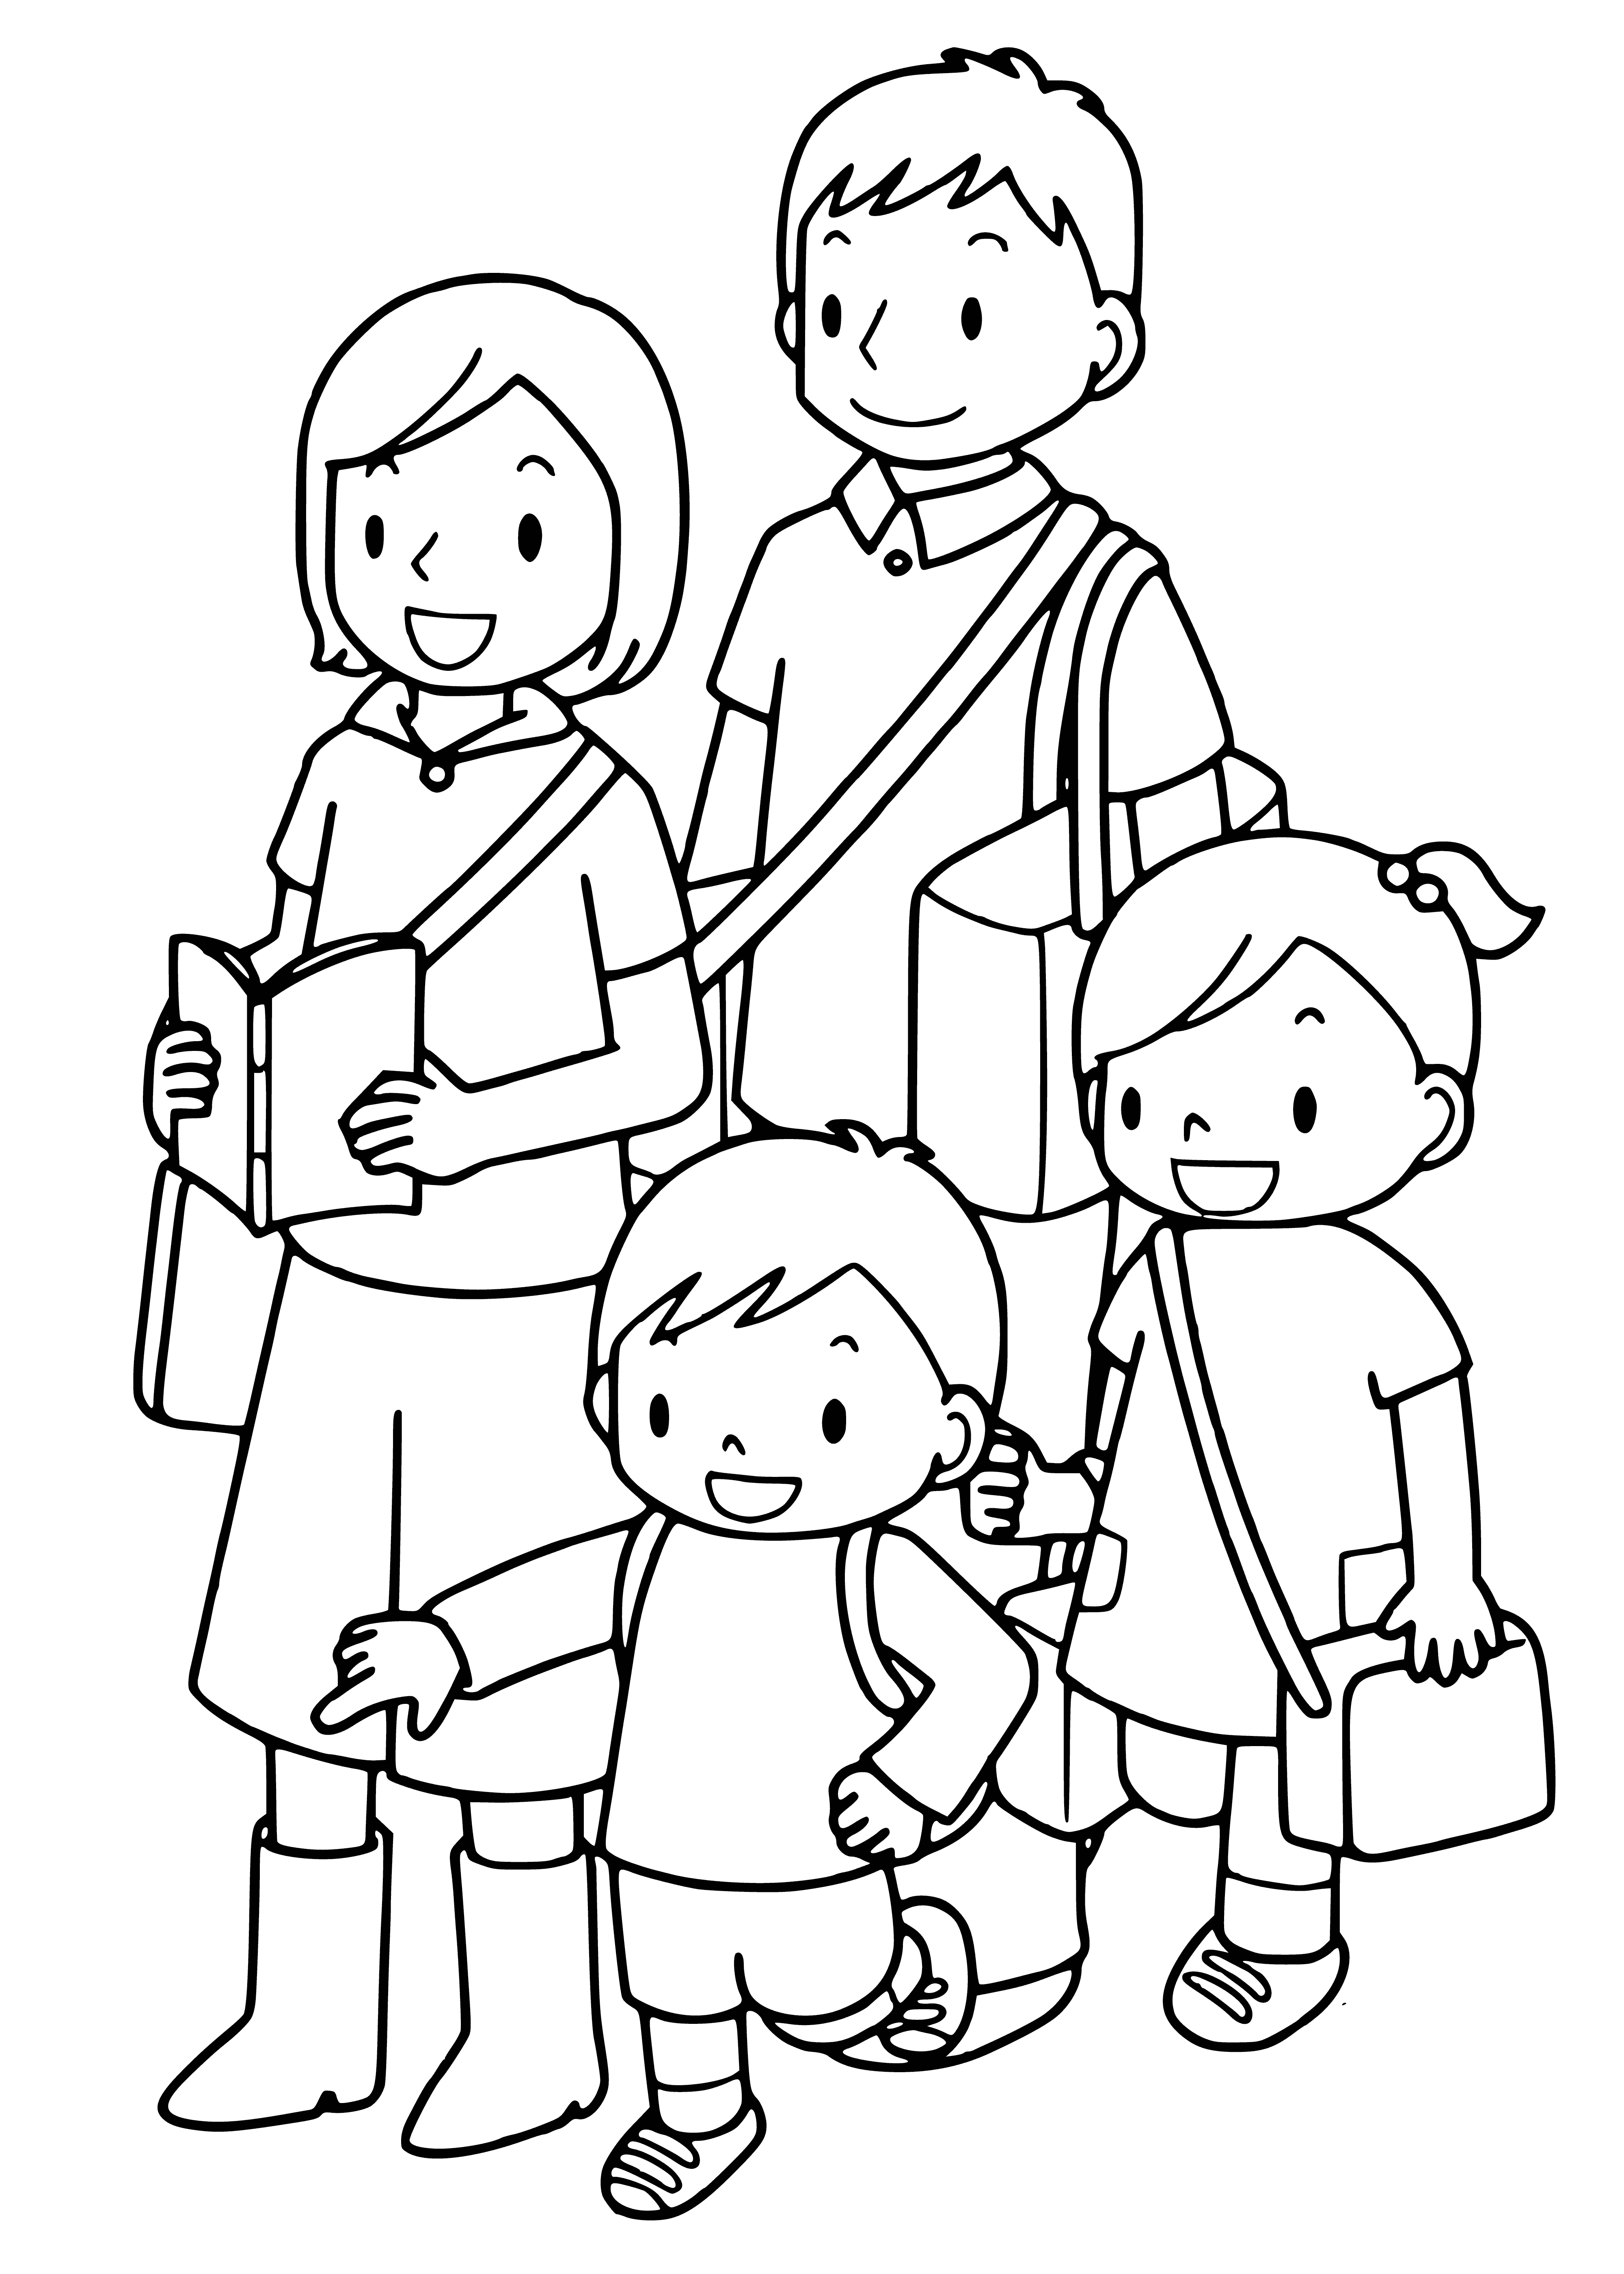 coloring page: Family enjoys each other's company, the little girl especially happy & making the most of a beautiful day. #familytime